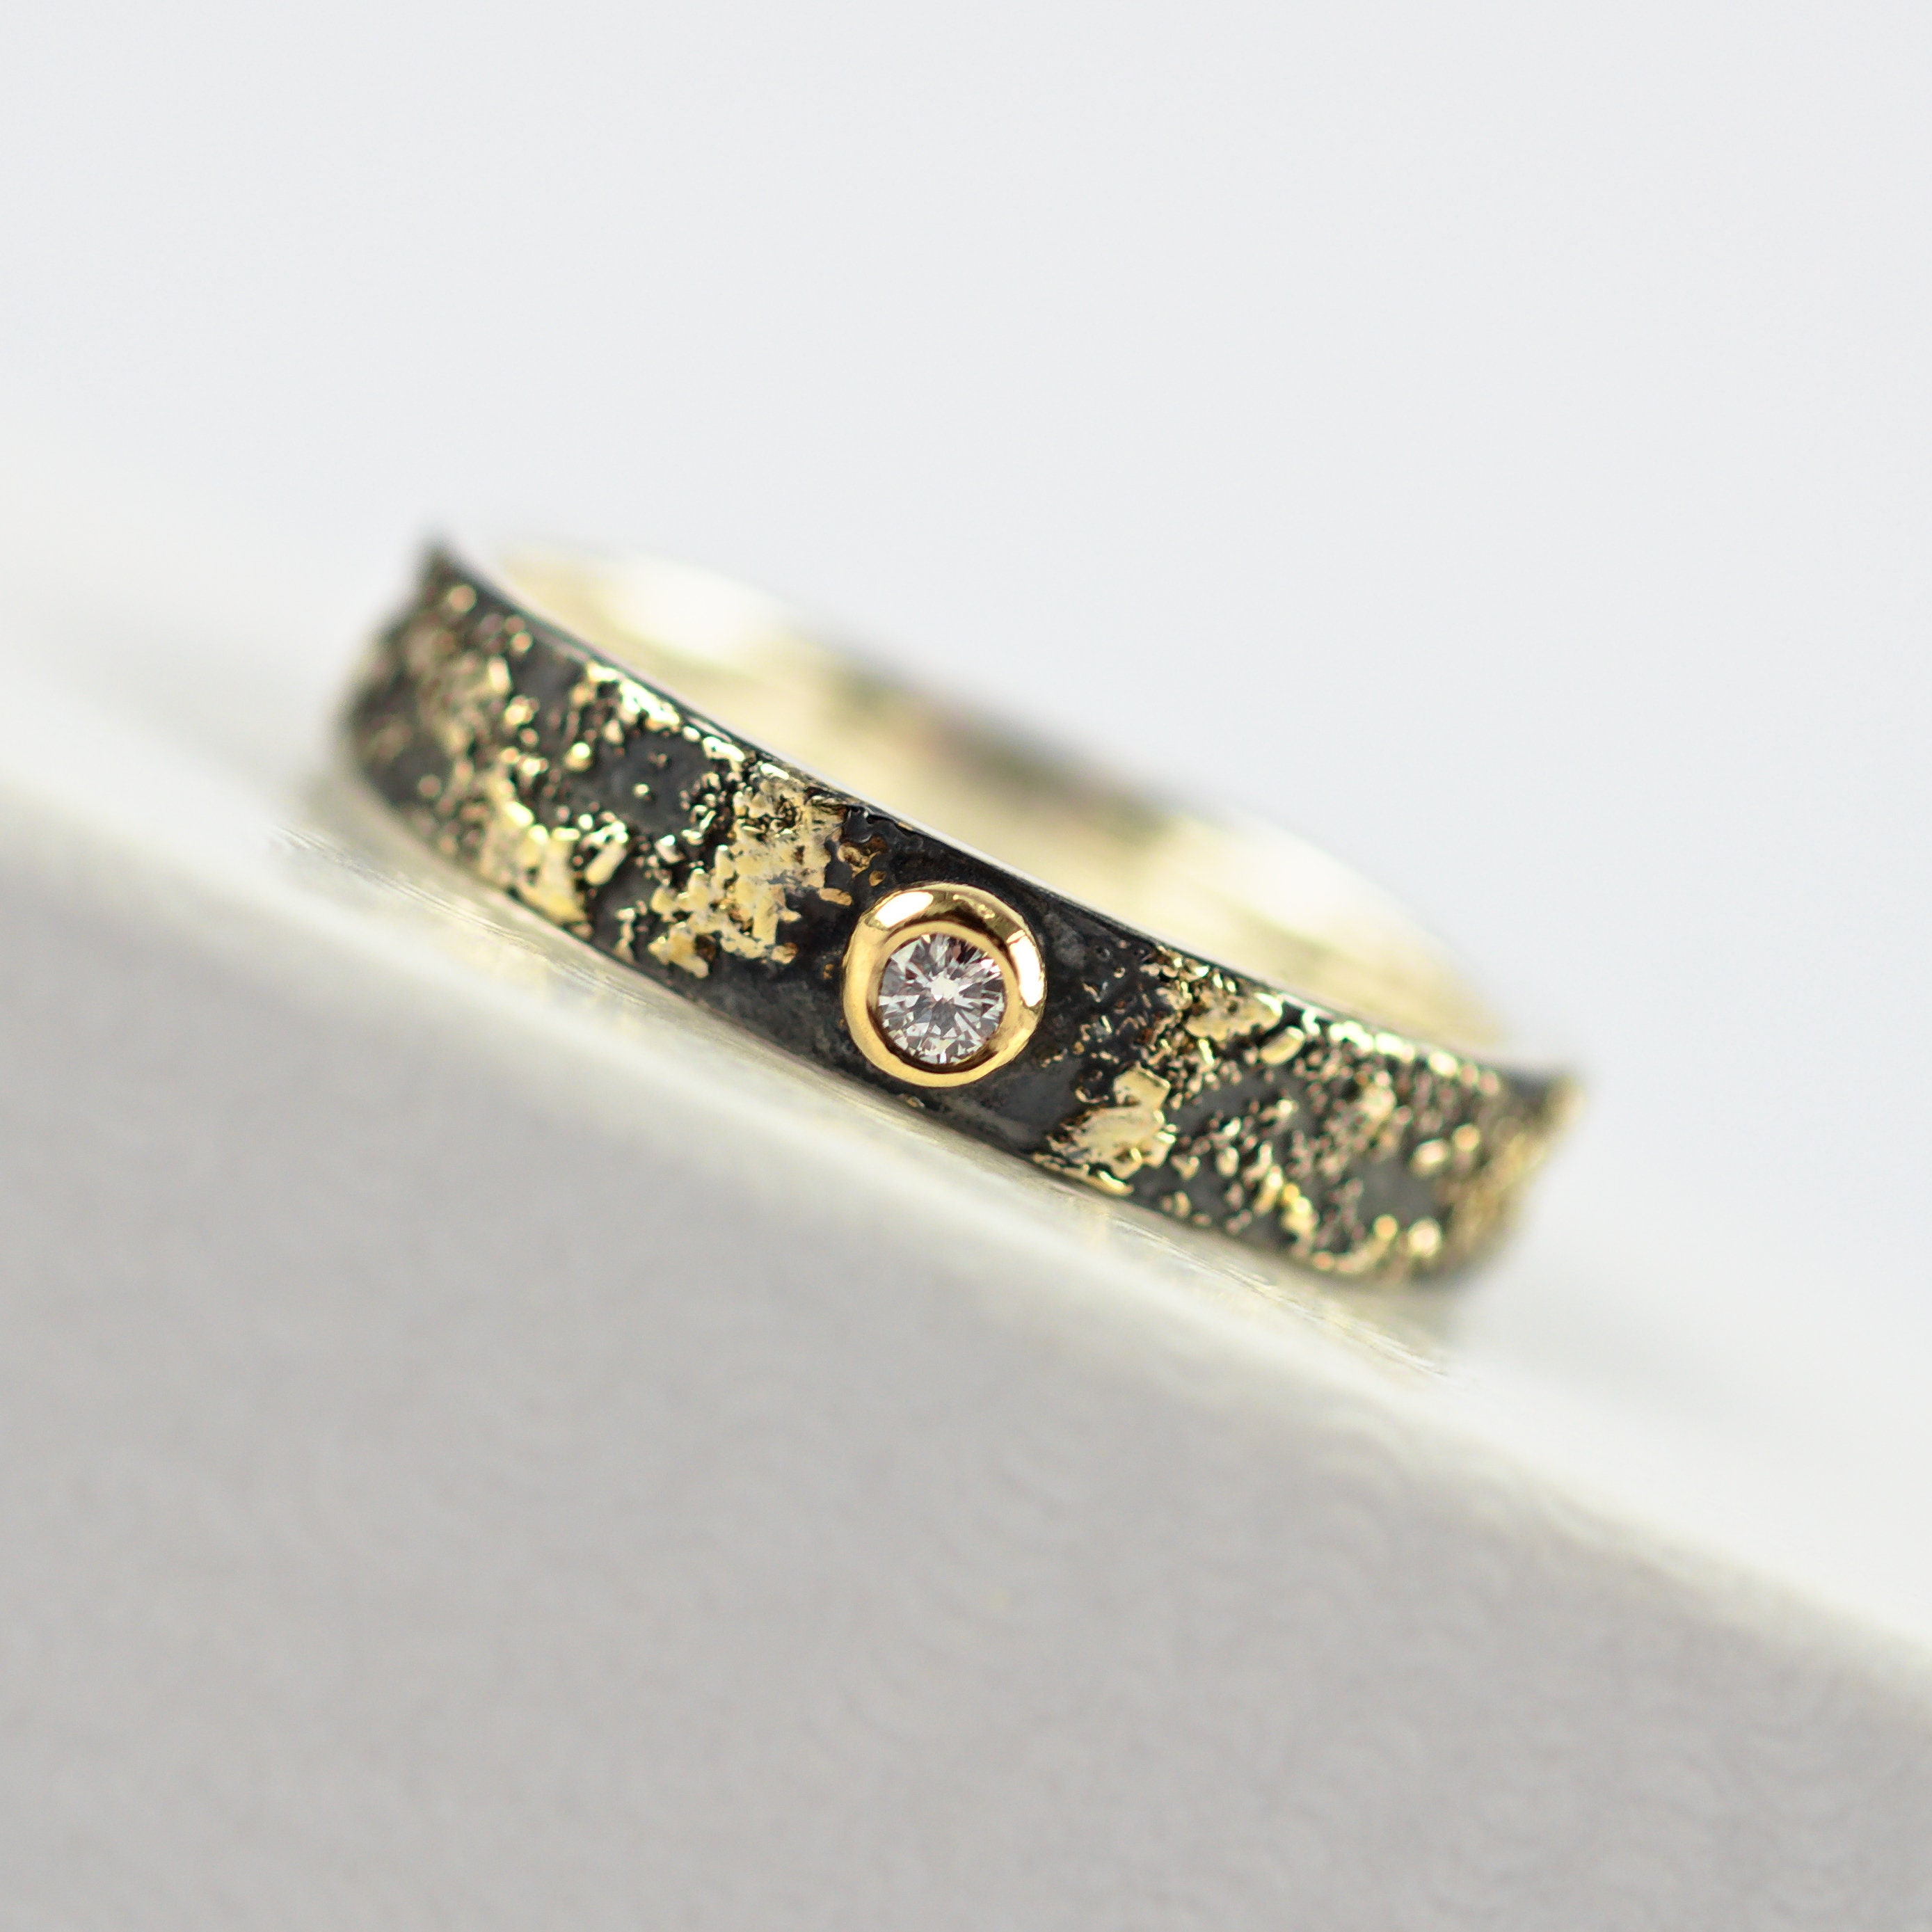 Gold Chaos - Tiny Diamond, Oxidized Silver & 18Kt Alternative Rustic Engagement Ring